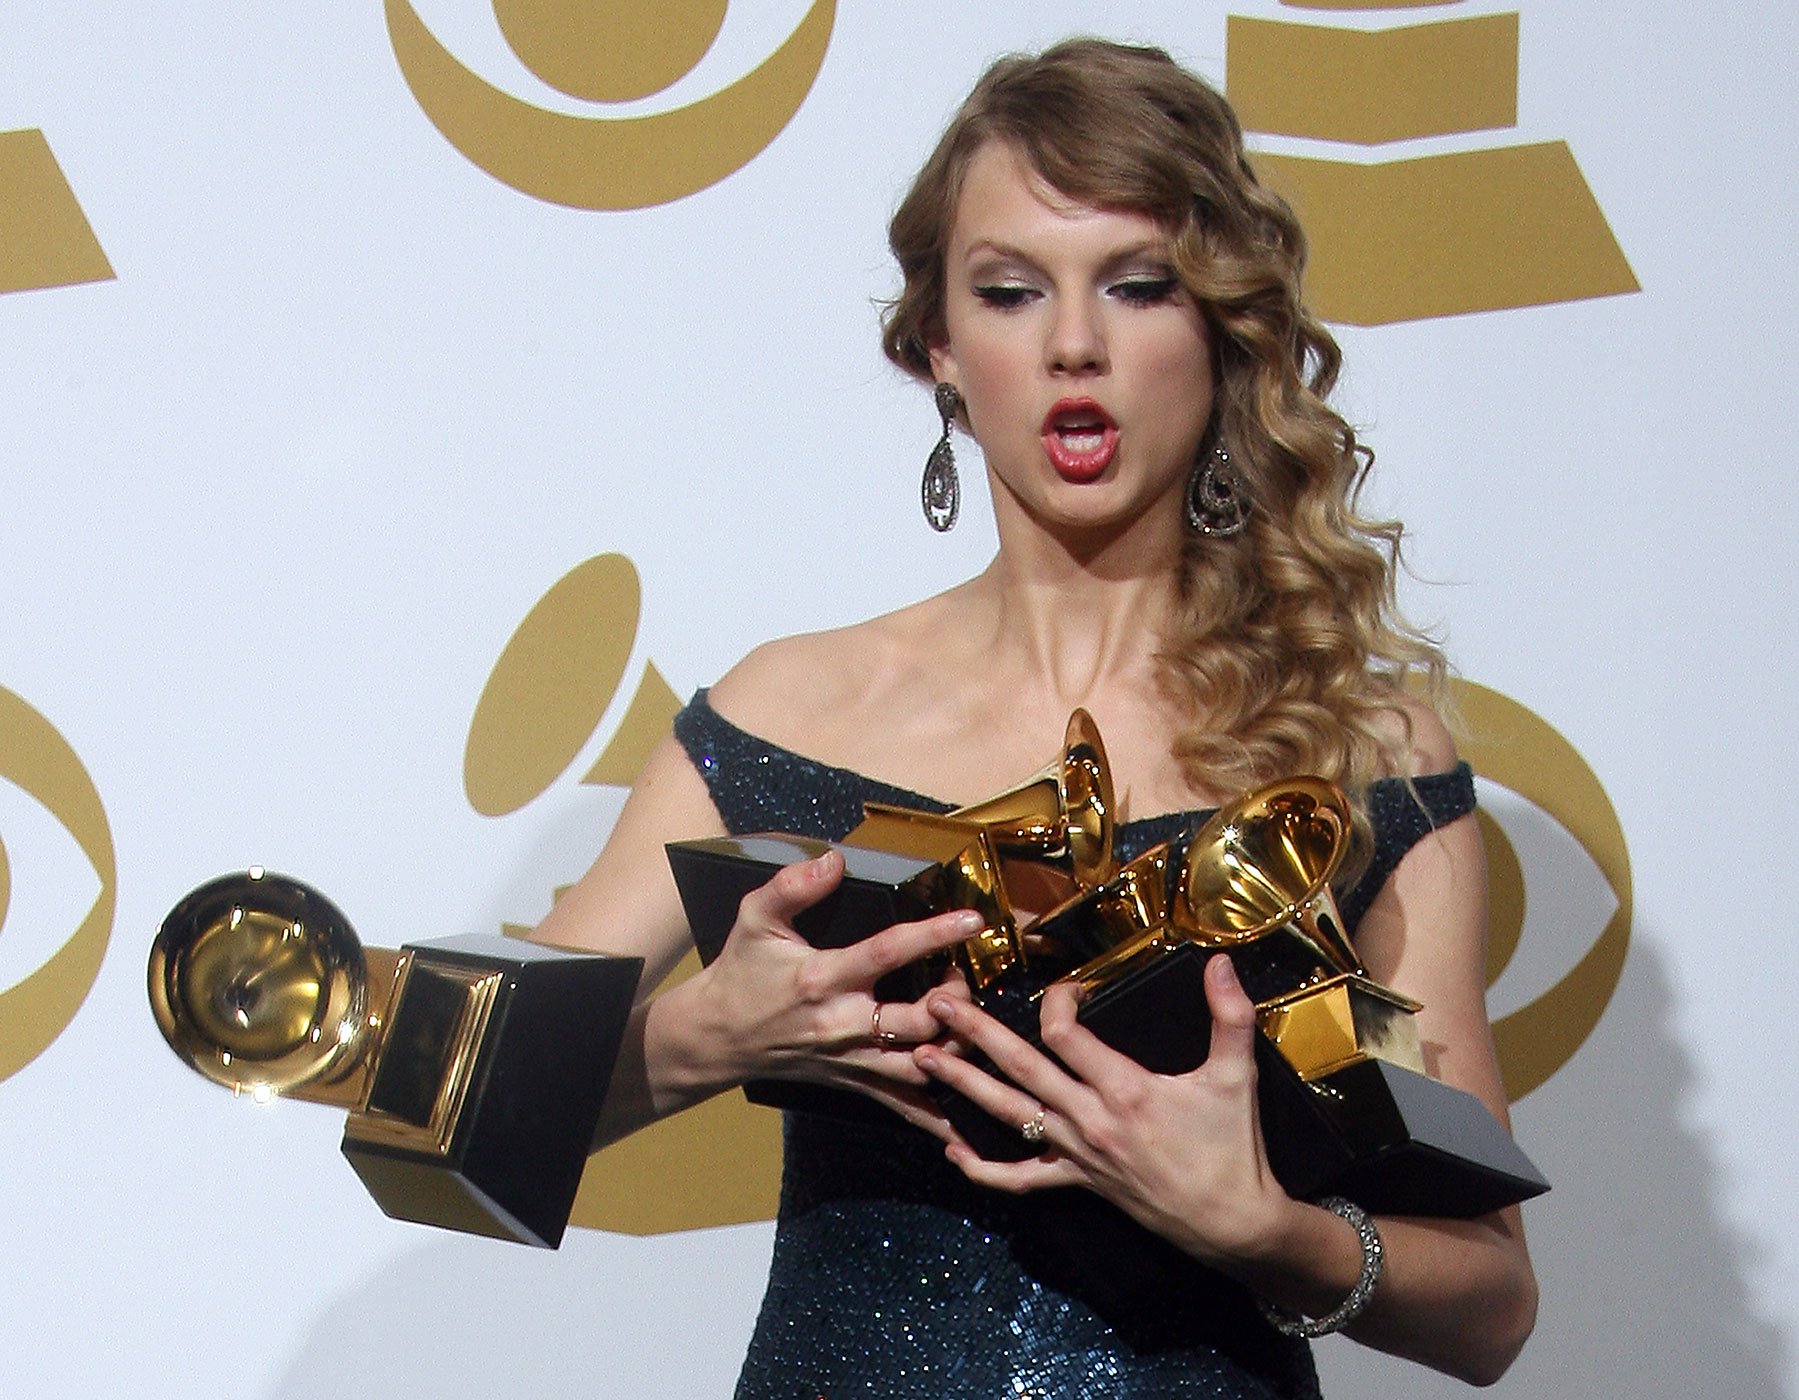 Taylor Swift drops one of her awards dur